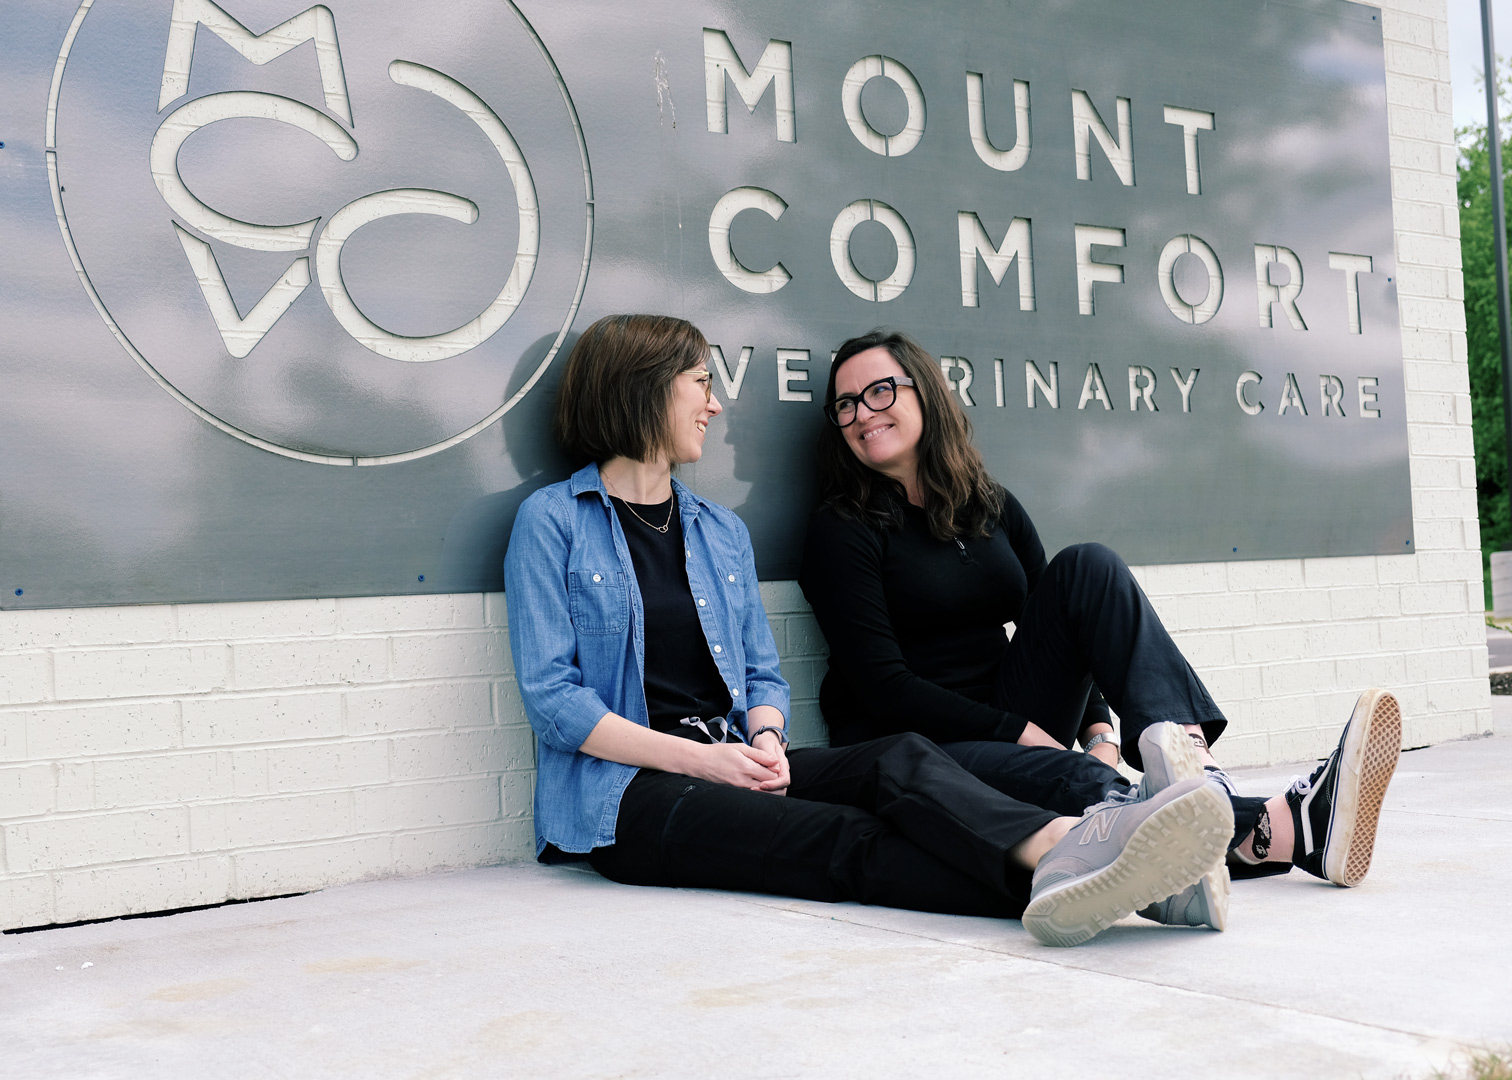 Dr. Heather Williams and Dr. Sarah Hantz sitting in front on the cut metal Mount Comfort Veterinary Care sign on the clinic wall